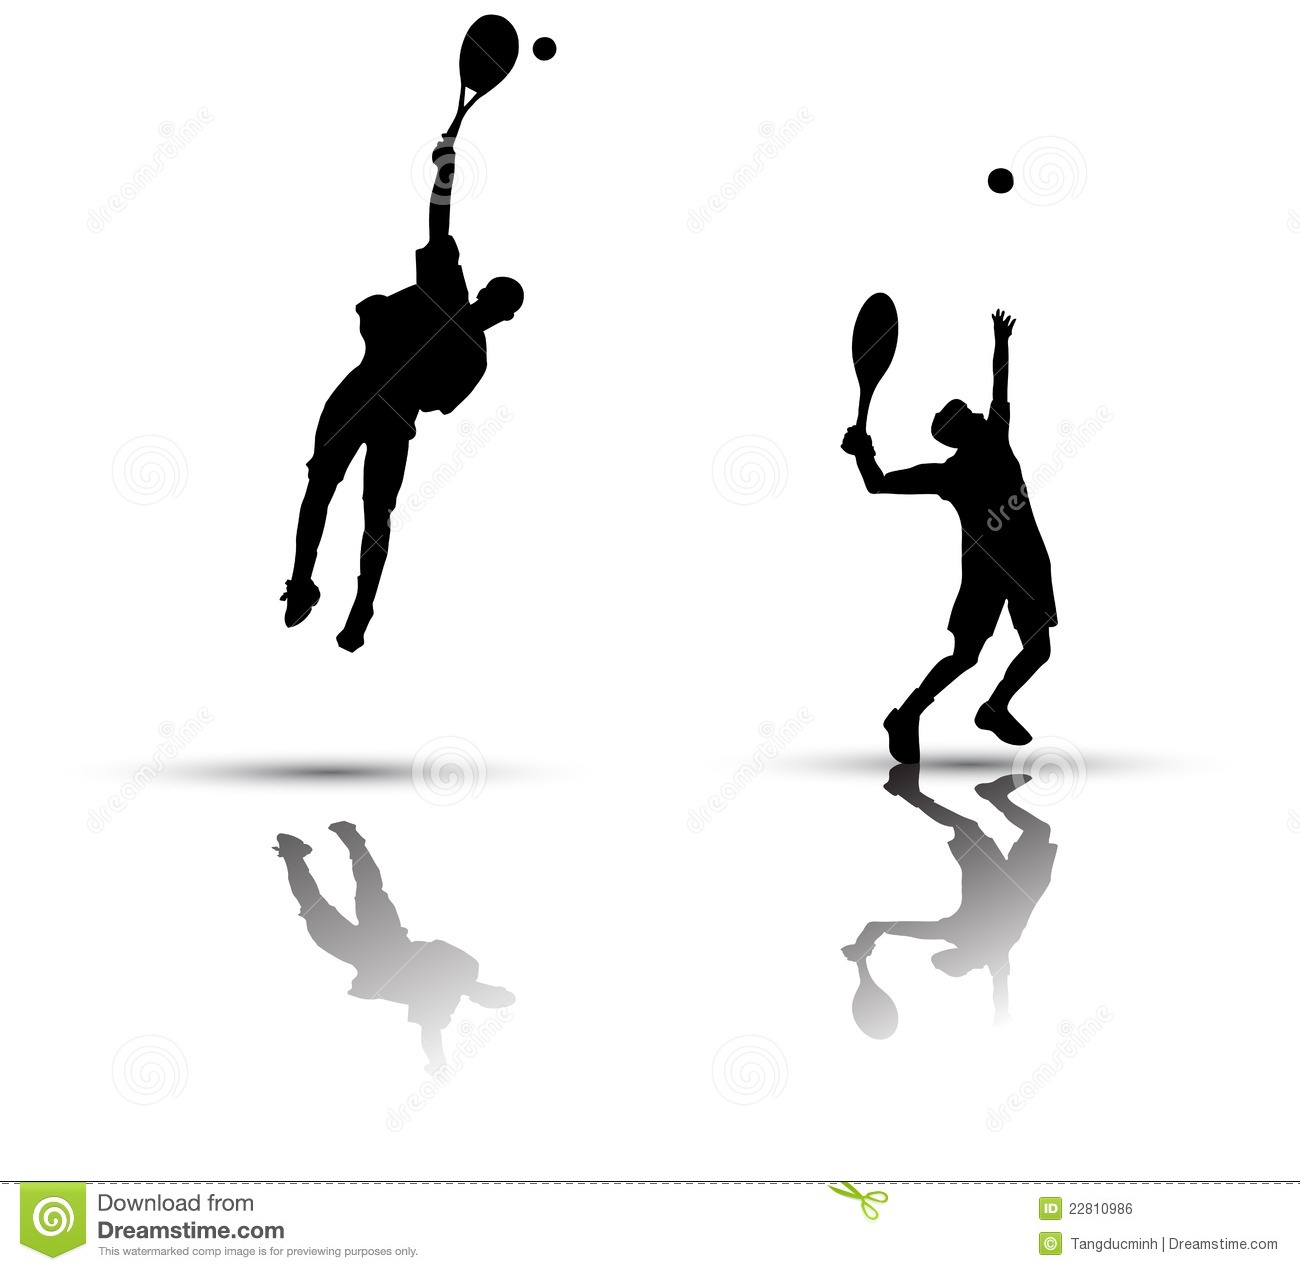 Tennis Player Silhouette Royalty Free Stock Image   Image  22810986